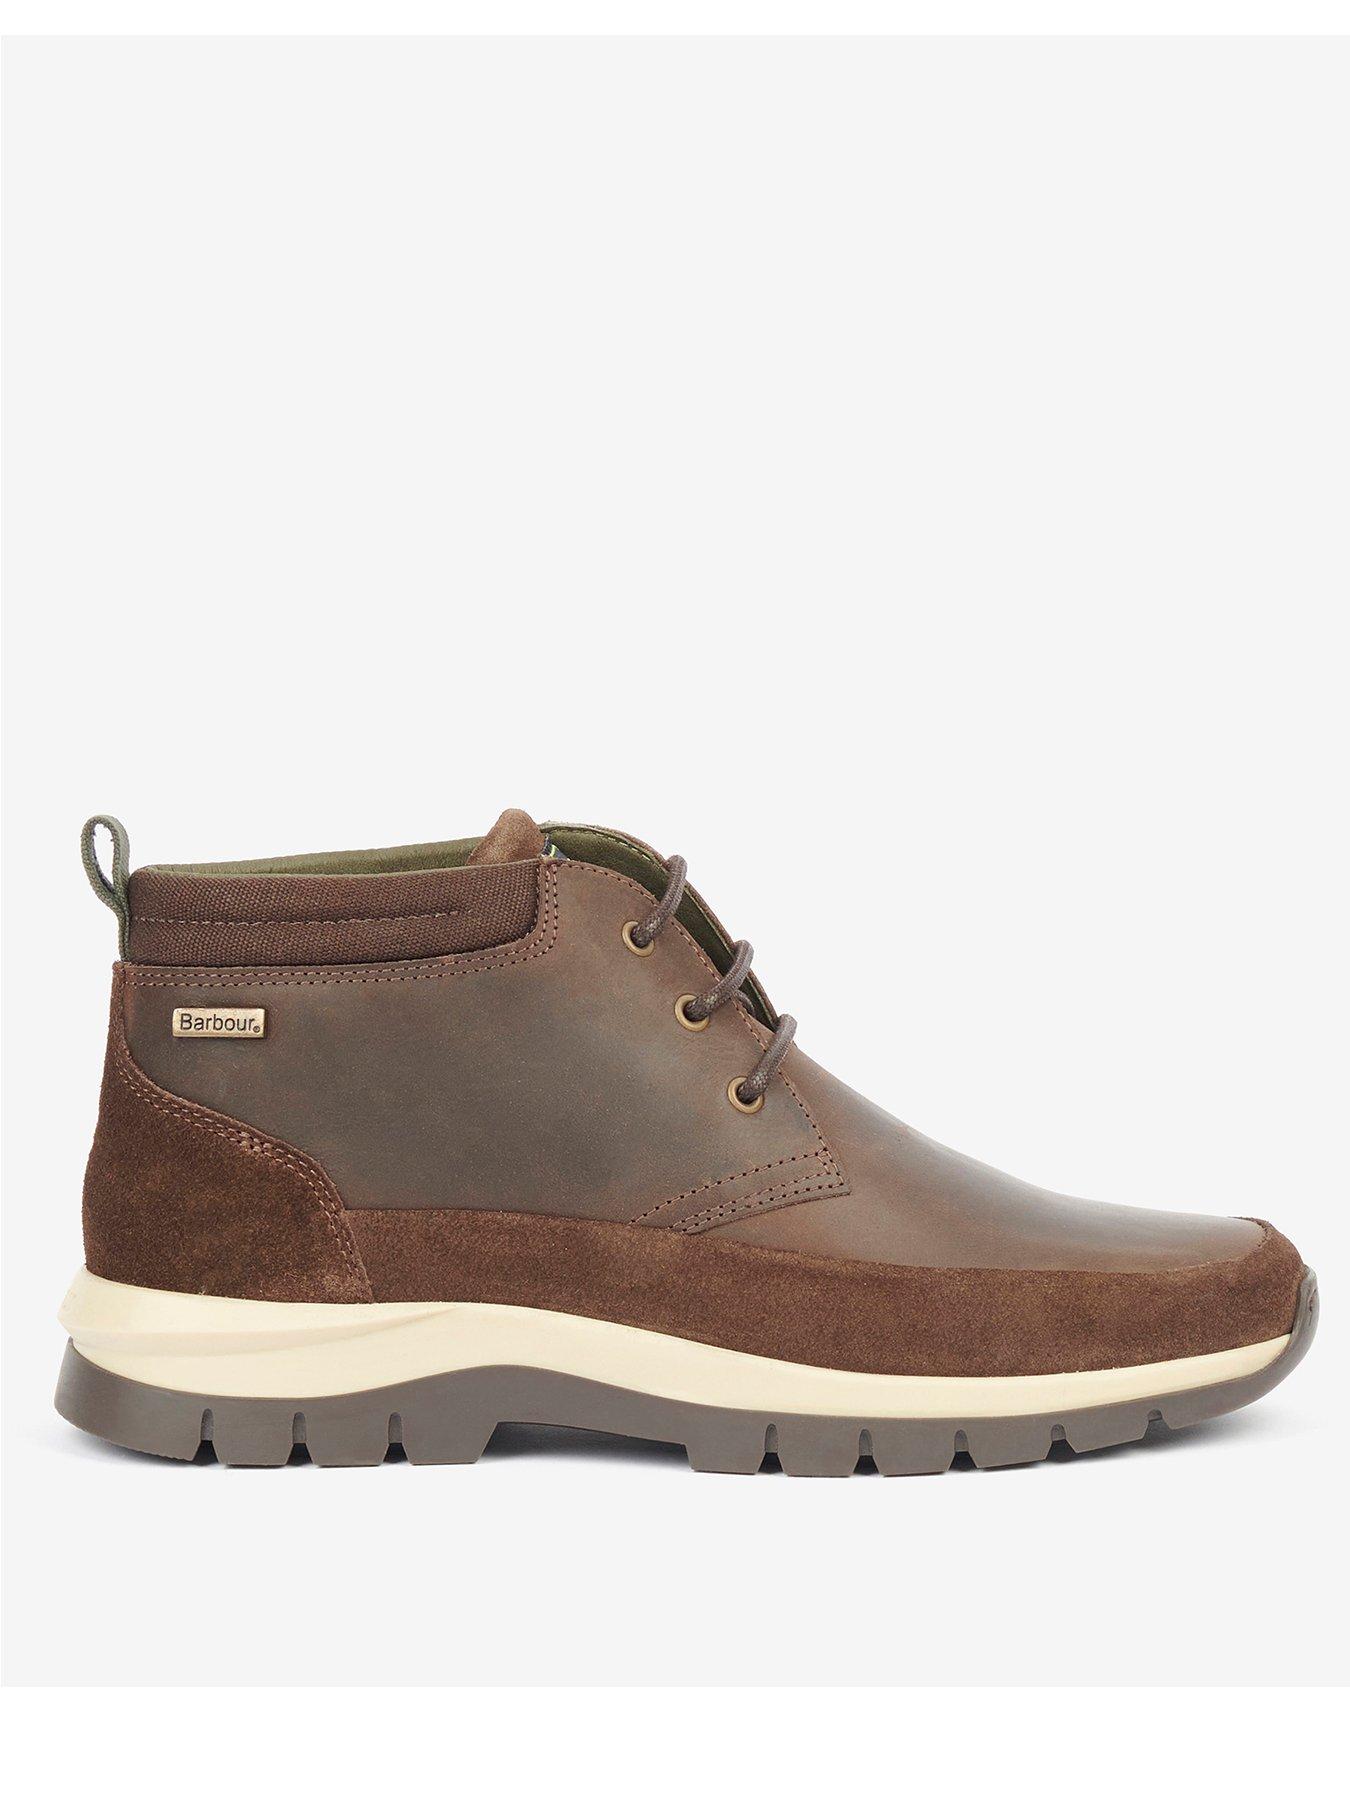 Barbour Underwood Suede Leather Boots | very.co.uk